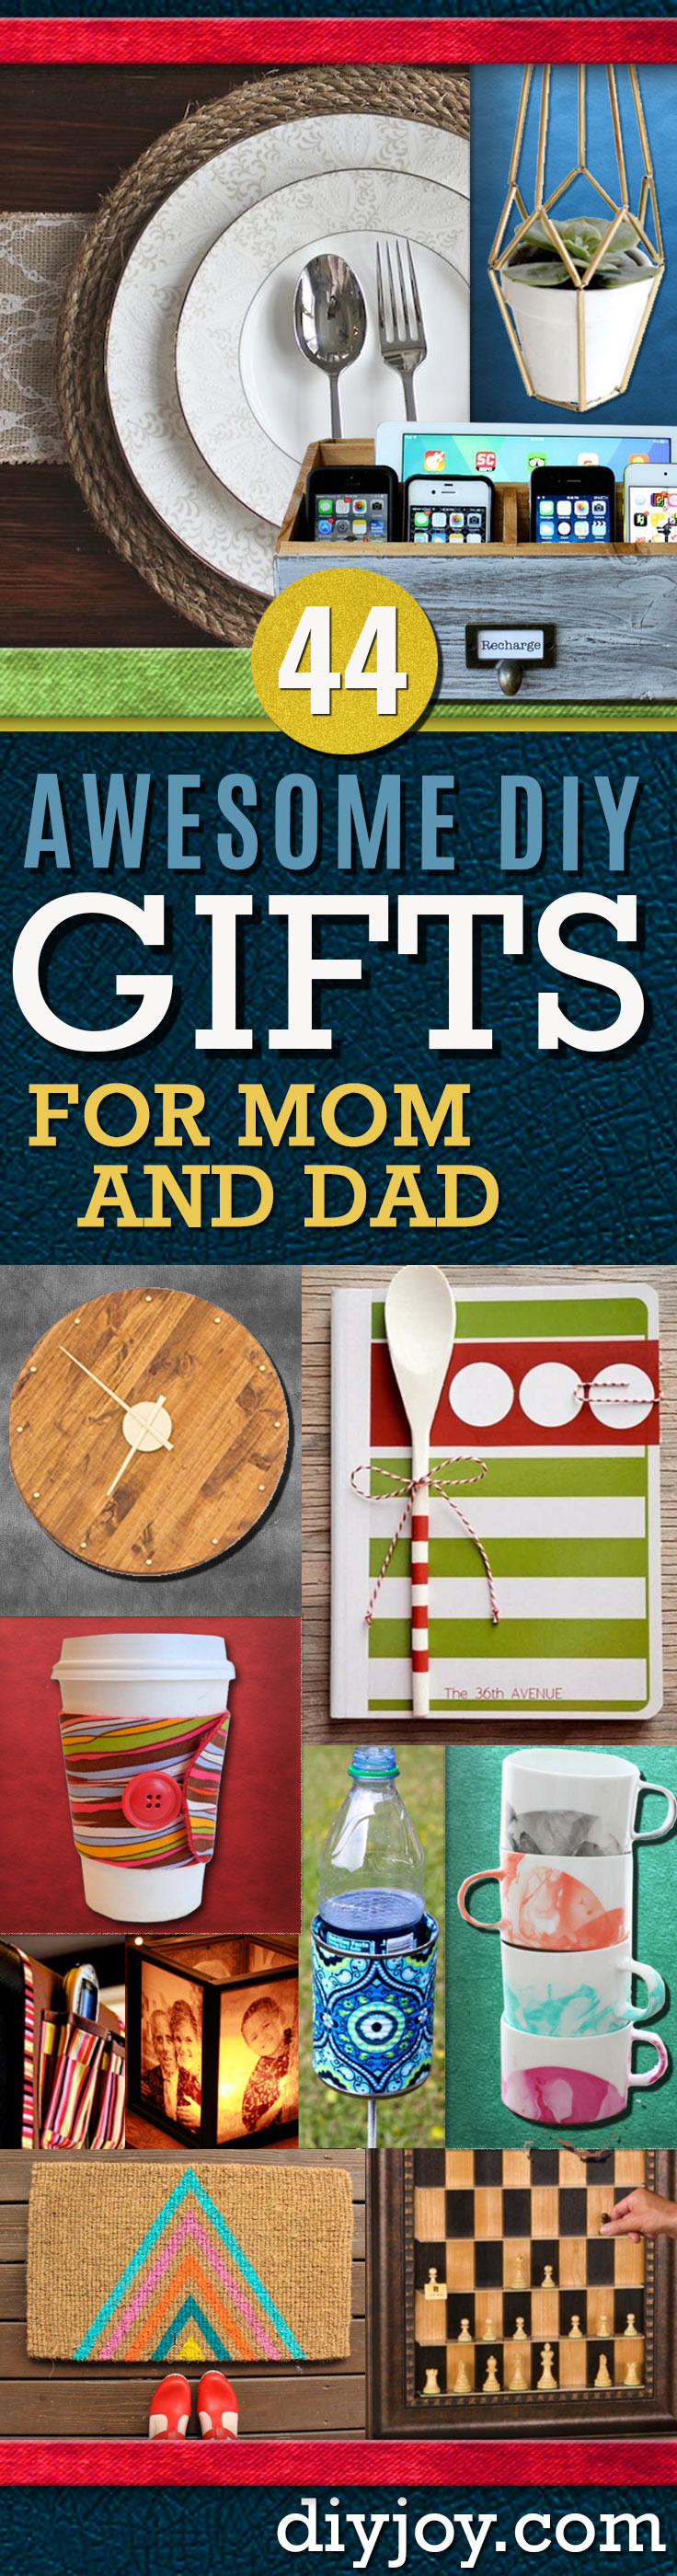 DIY Christmas Presents For Mom
 Awesome DIY Gift Ideas Mom and Dad Will Love